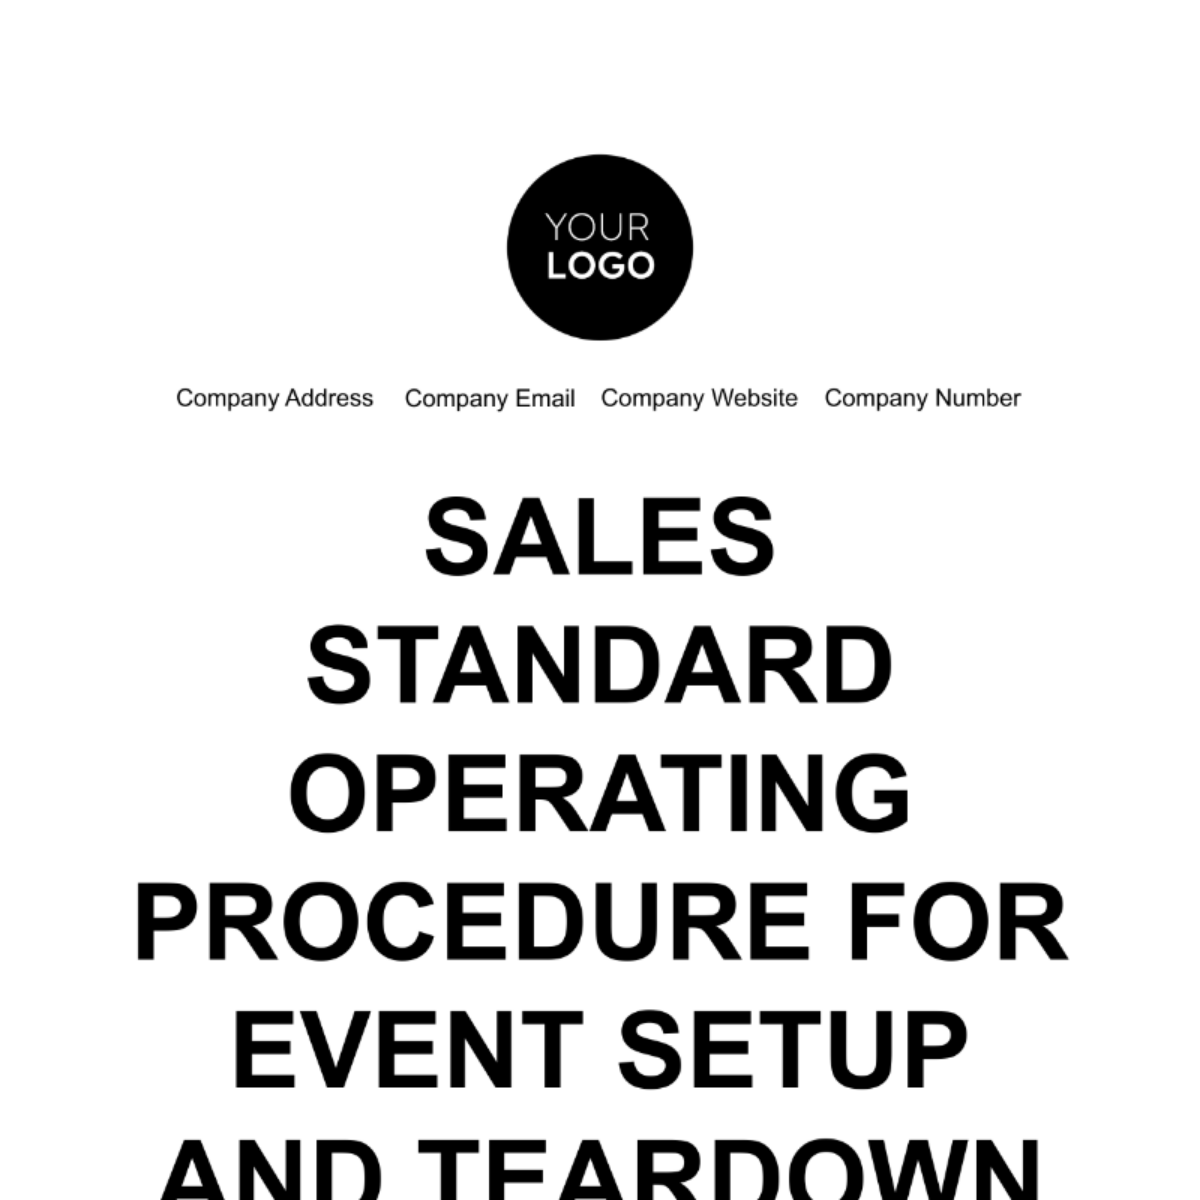 Free Sales Standard Operating Procedure for Event Setup and Teardown Template